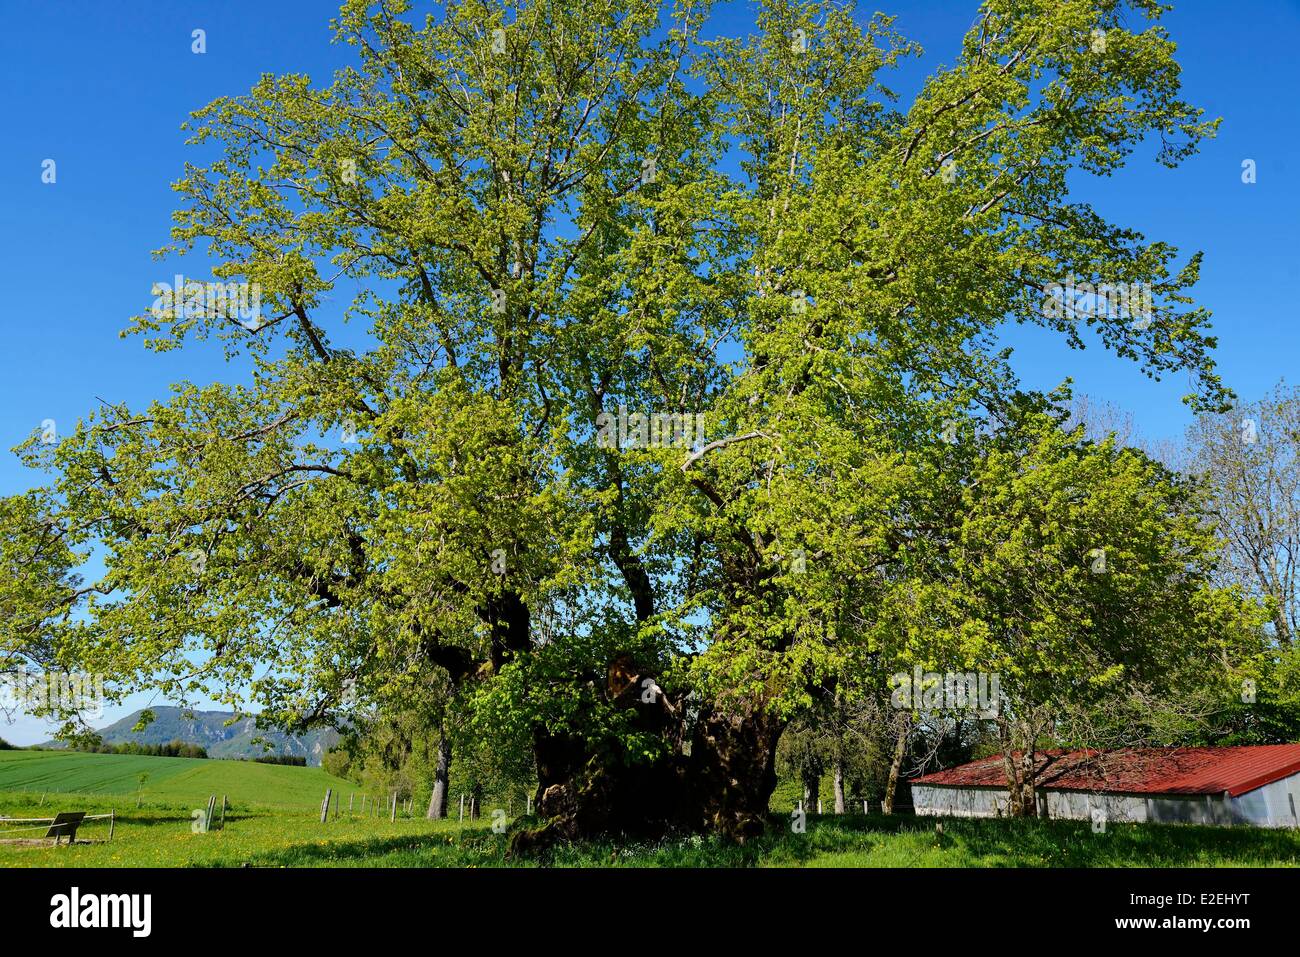 France, Jura, Bracon, Grange Sauvaget lime dating from the late 15th century listed Remarkable tree, Tilia grandifolia Stock Photo